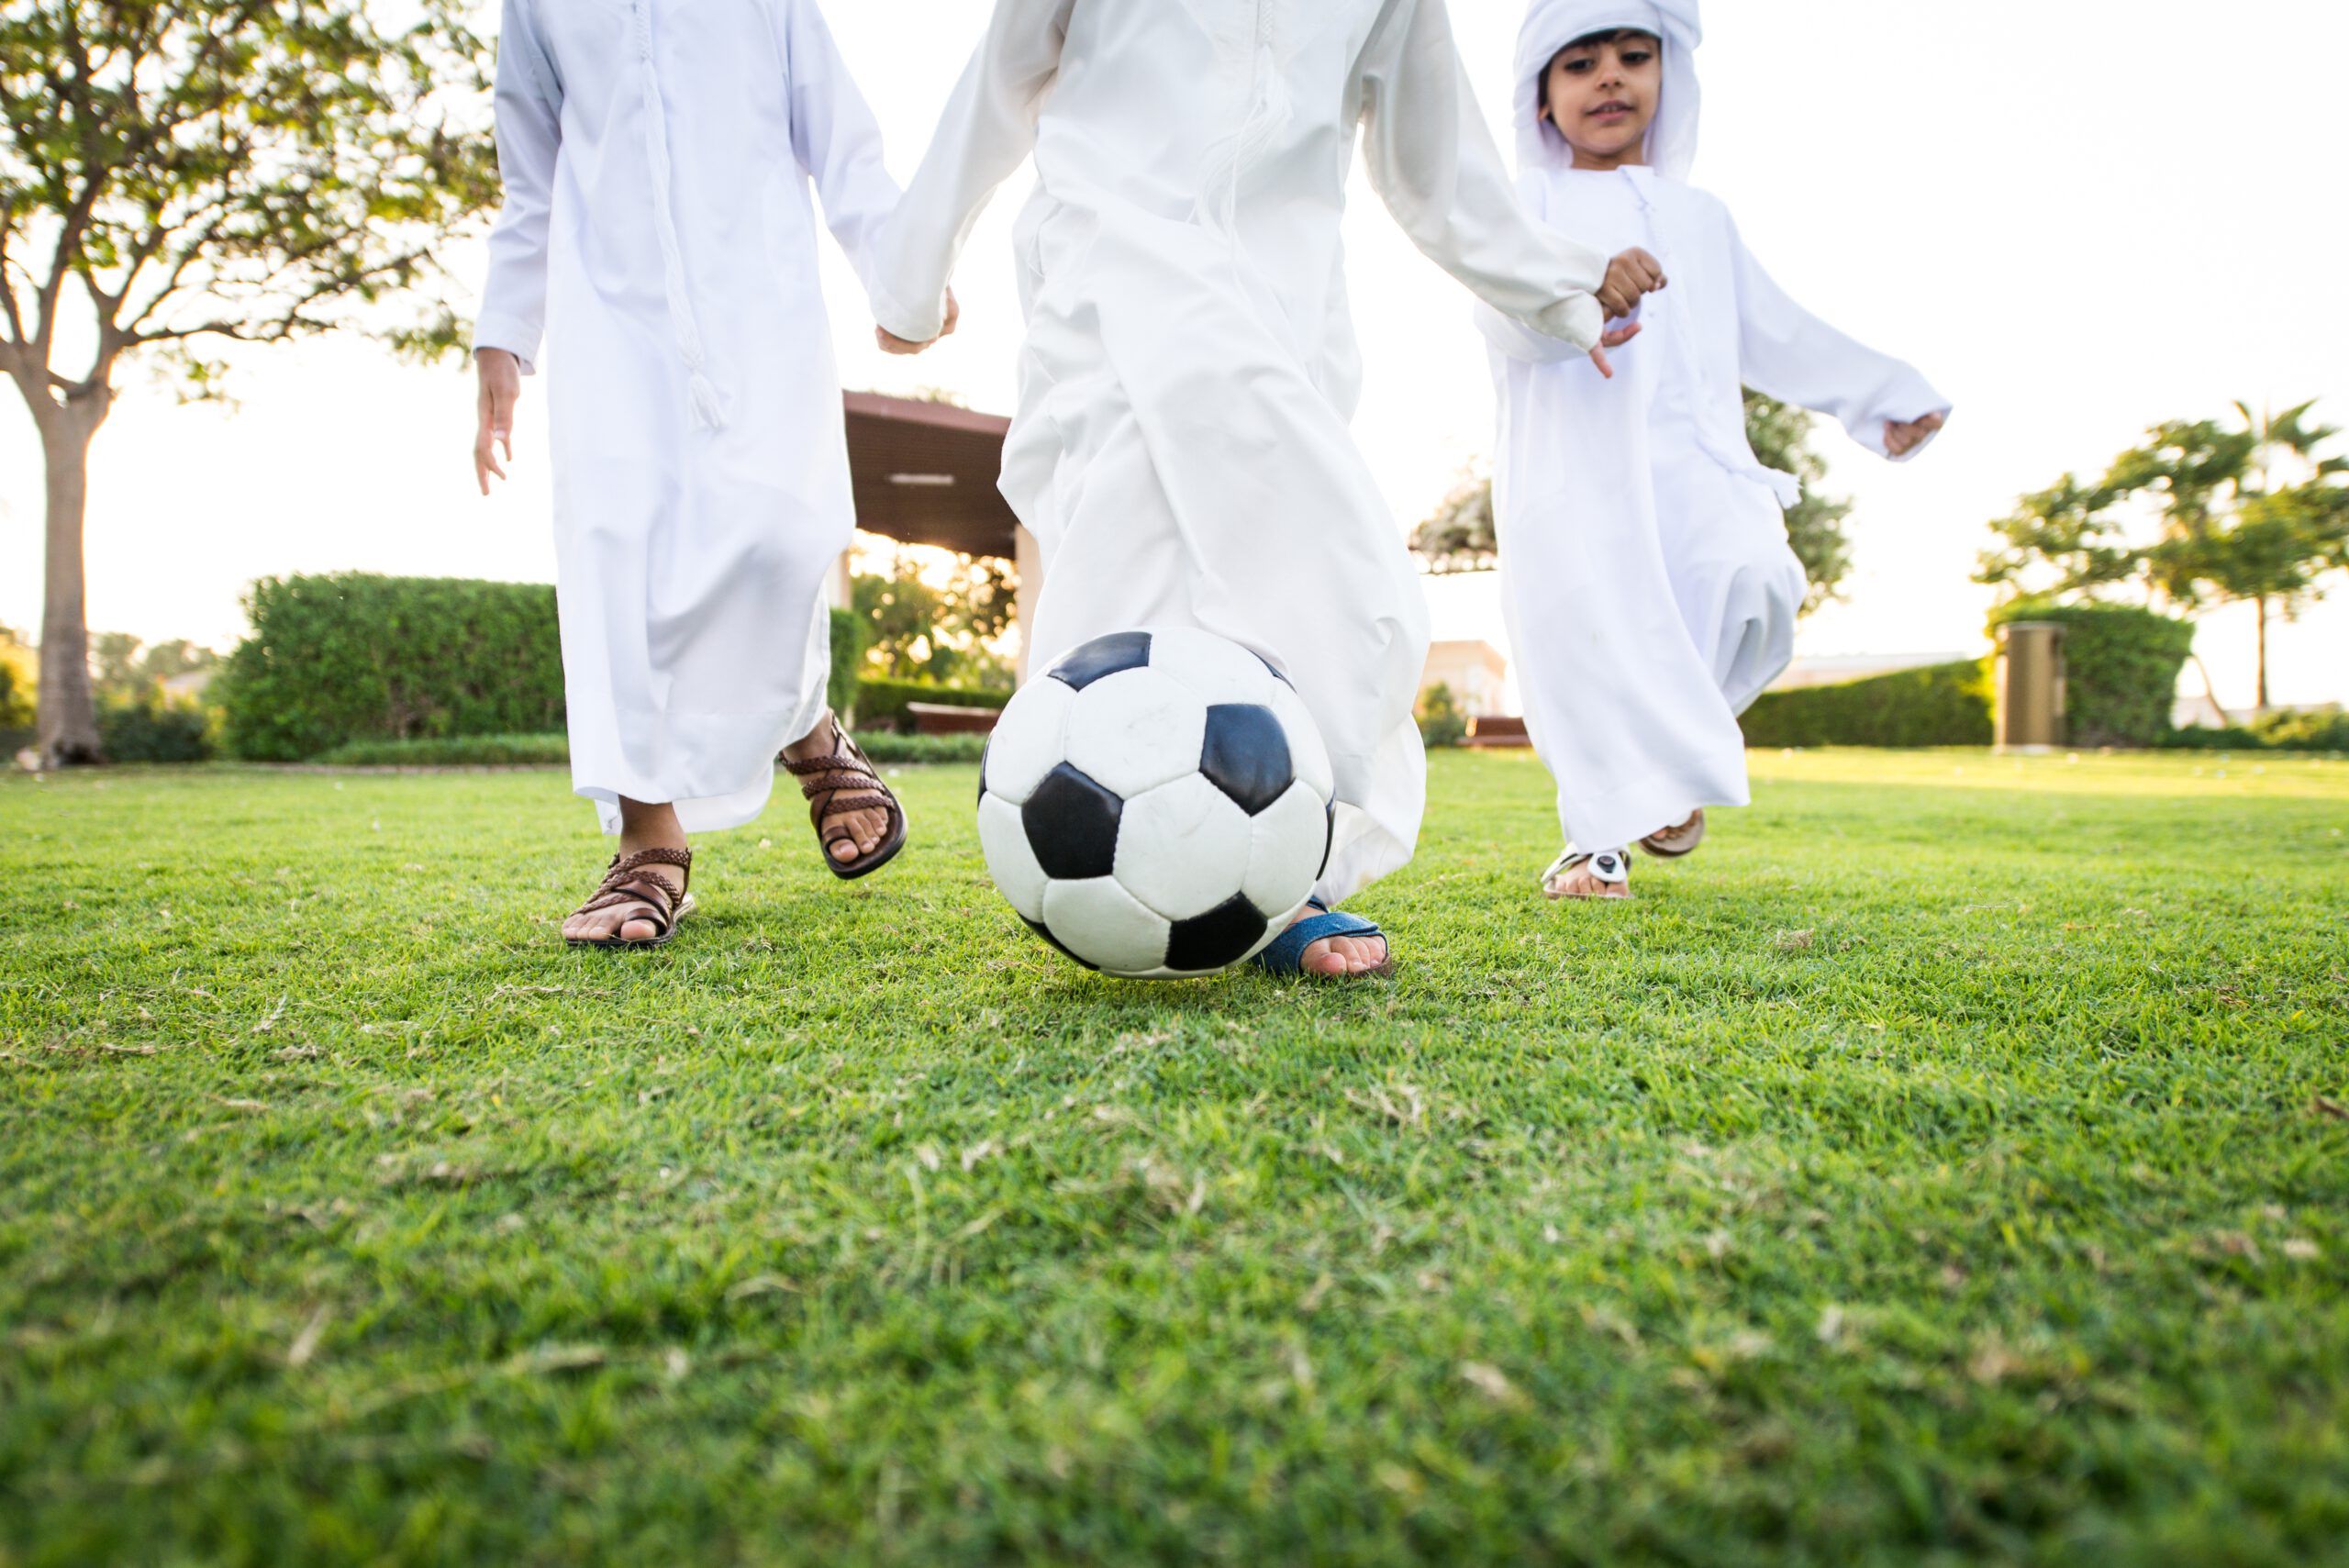 What to do in Dubai with kids - Kids playing football